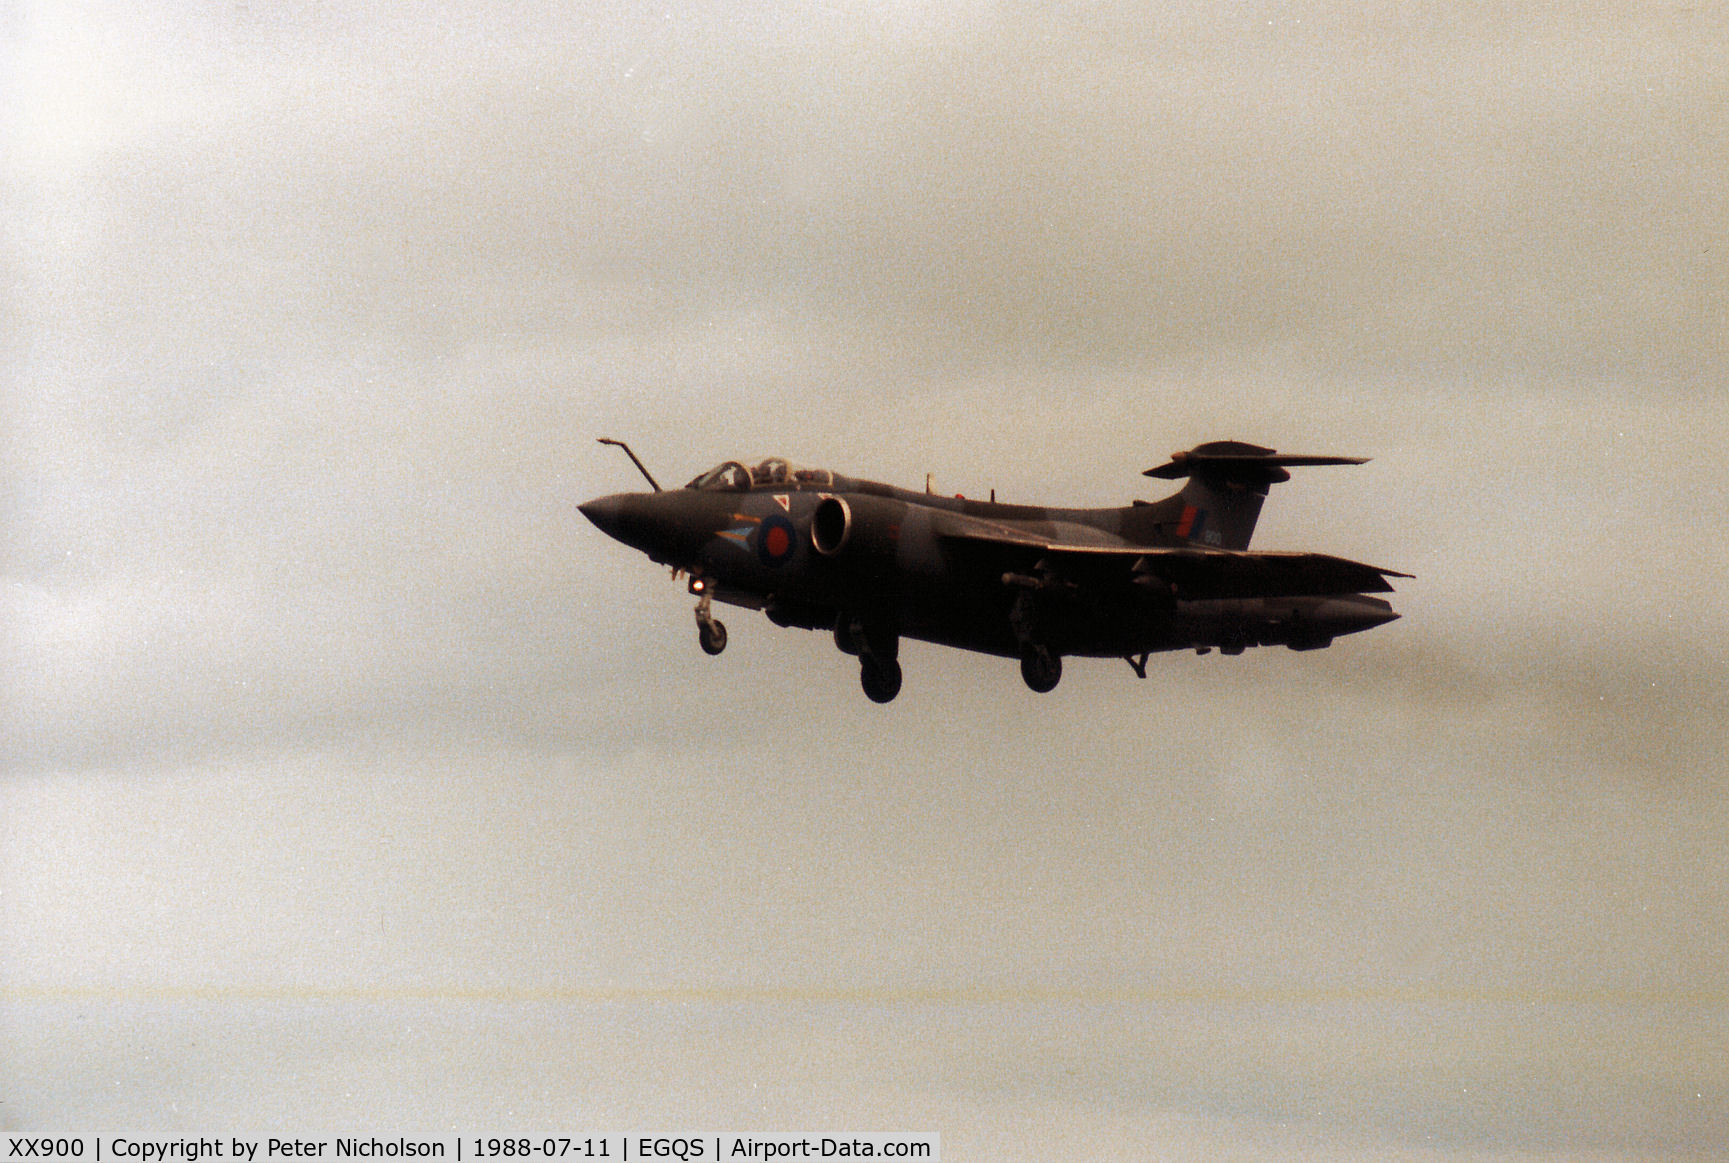 XX900, 1976 Hawker Siddeley Buccaneer S.2B C/N B3-05-75, Buccaneer S.2B of 208 Squadron on final approach to RAF Lossiemouth in the Summer of 1988.